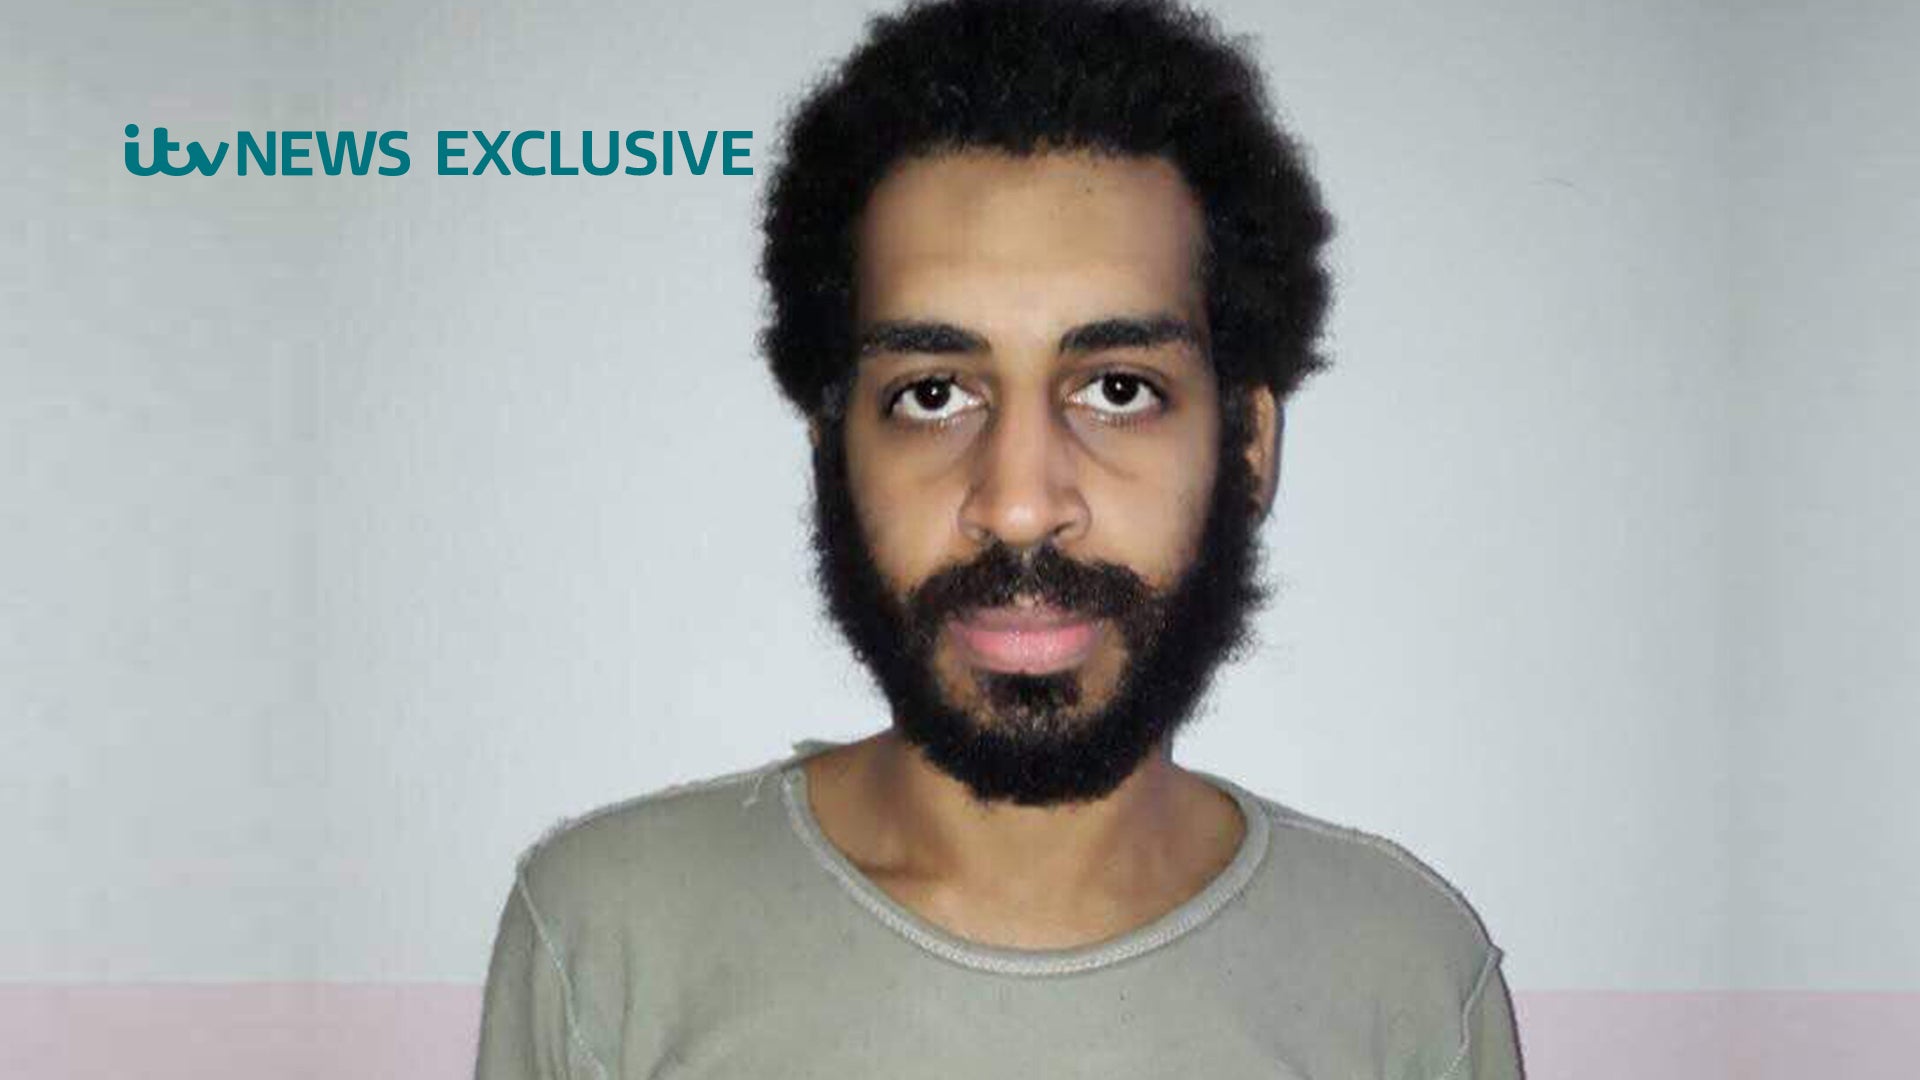 Kotey was part of an Isis militant cell dubbed The Beatles due to their English accents (ITV/PA)